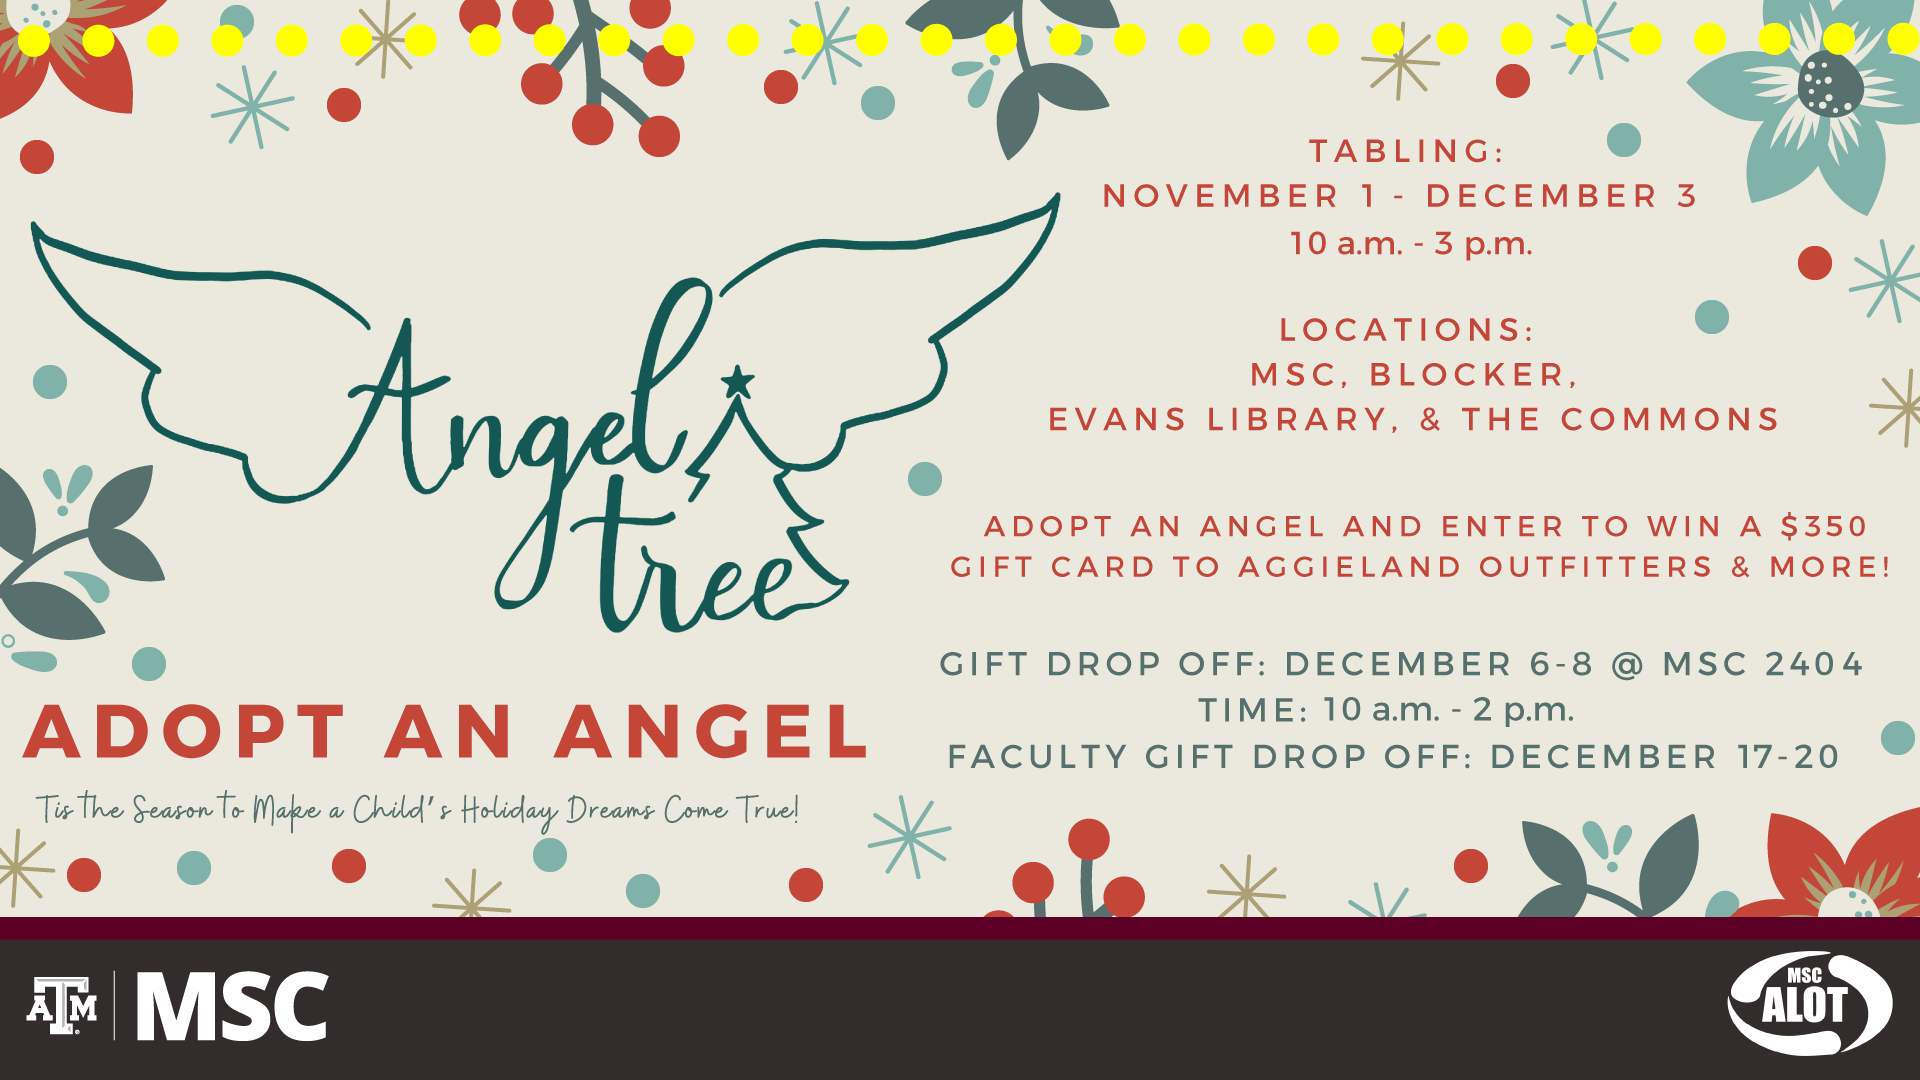 MSC ALOT presents: Angel Tree. Adopt an Angel. Tis the season to make a child's holiday dreams come true! Tabling: November 1 - December 3. from 10 a.m. to 3 p.m. Locations: MSC, Blocker, Evans library and the Commons. Adopt and angel and enter to win a $350 gift card to Aggieland Outfitters and more! Gift Drop off: December 6 to December 8 at the MSC 2404. From 10 a.m. to 2 p.m. Faculty Gift Drop Off: December 17 to December 20